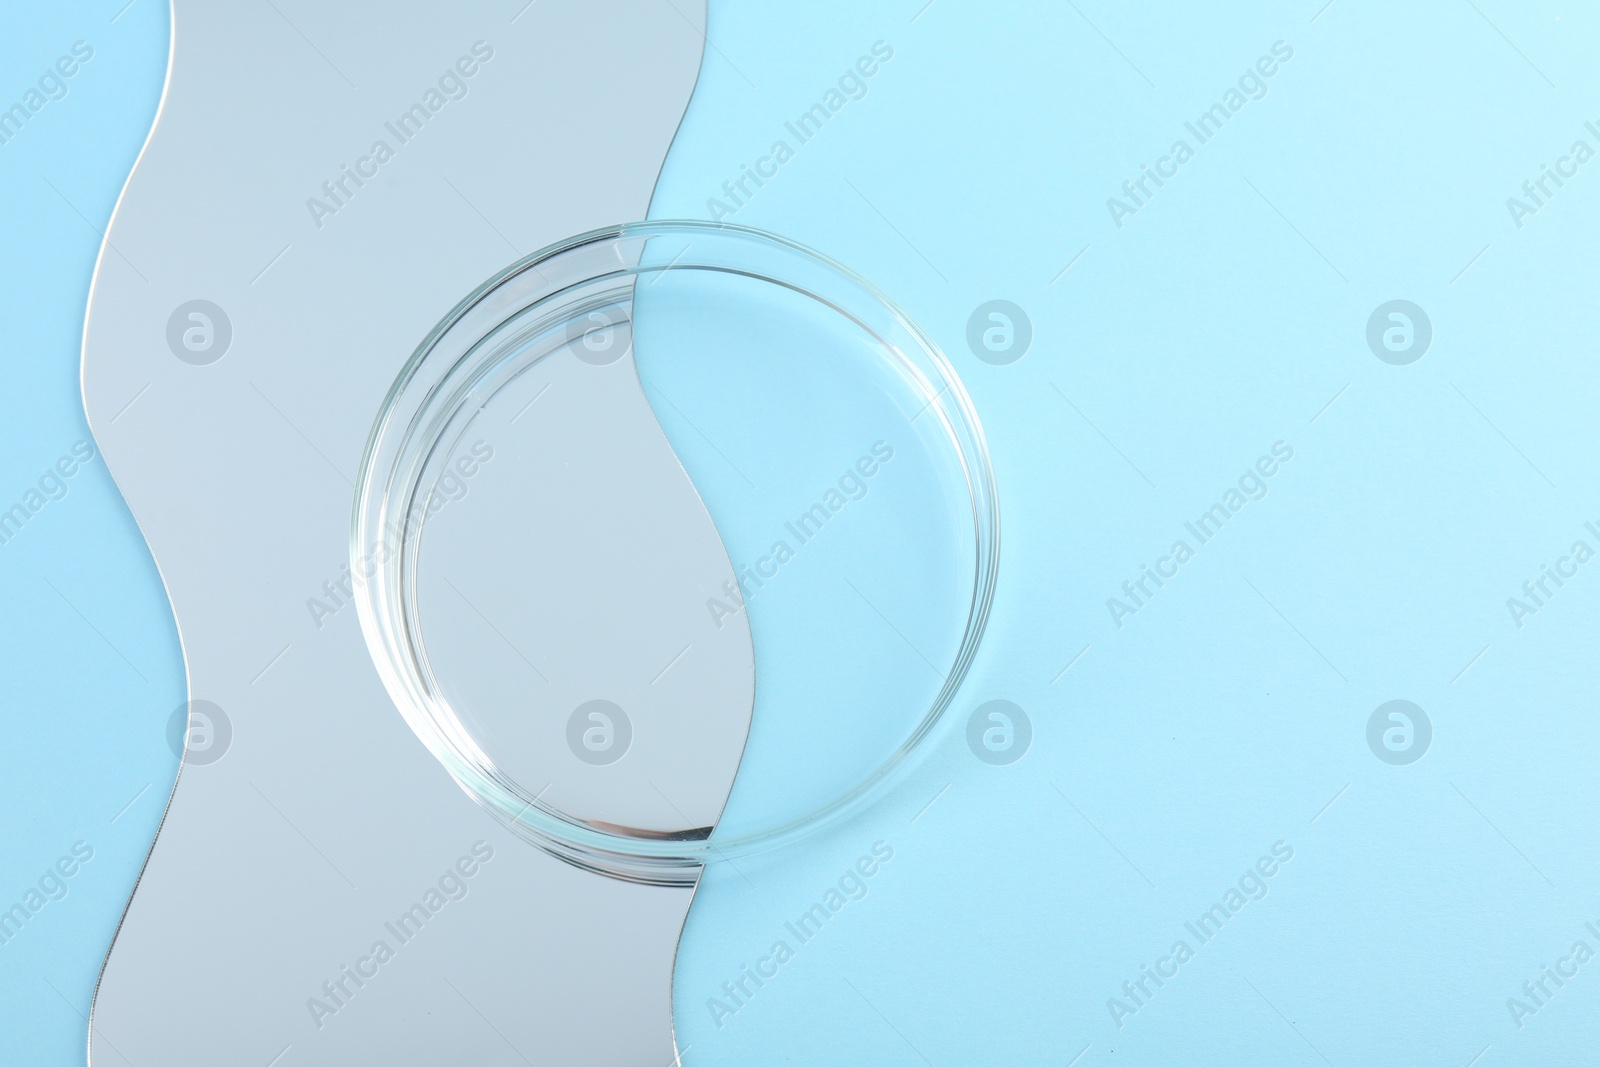 Photo of Empty petri dish and mirror on light blue background, flat lay. Space for text